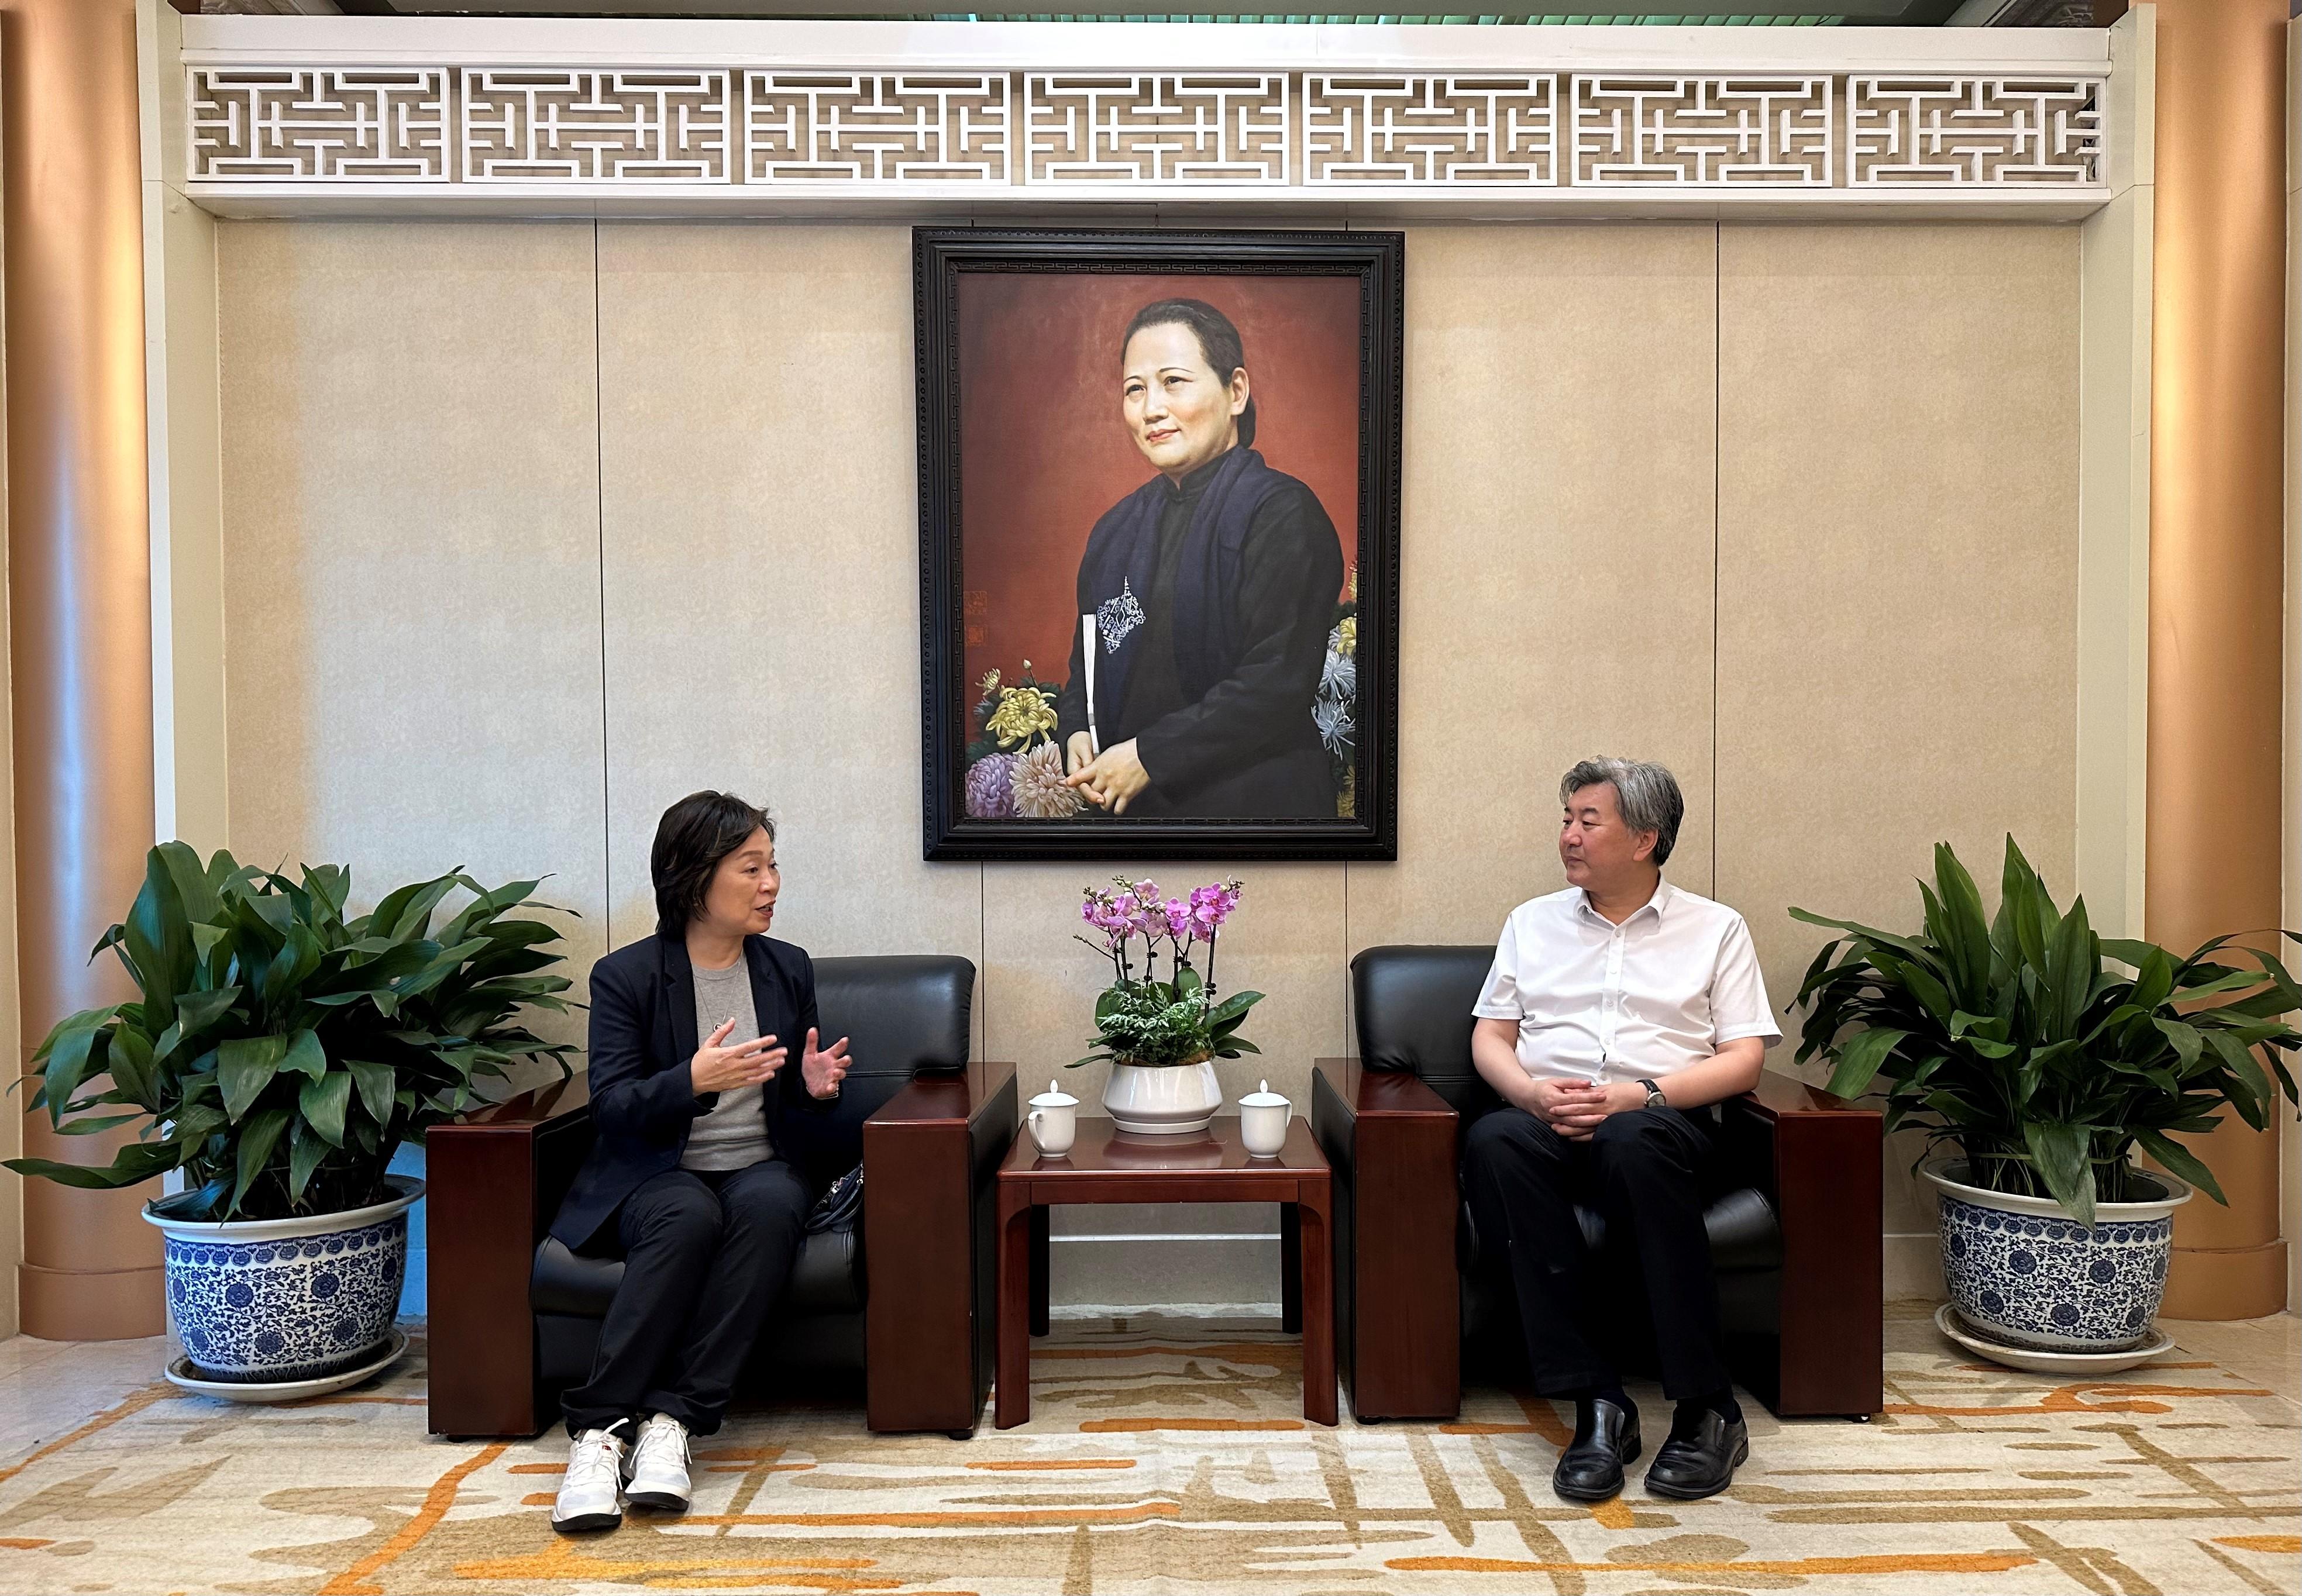 The Secretary for Education, Dr Choi Yuk-lin (left), visited the Former Residence of Soong Ching Ling, the Honorary President of the People's Republic of China in Beijing, and met the deputy secretary general of the China Soong Ching Ling Foundation and director of the Management Center of the Former Residence of Soong Ching Ling, Mr Li Anjin (right), yesterday (September 25).